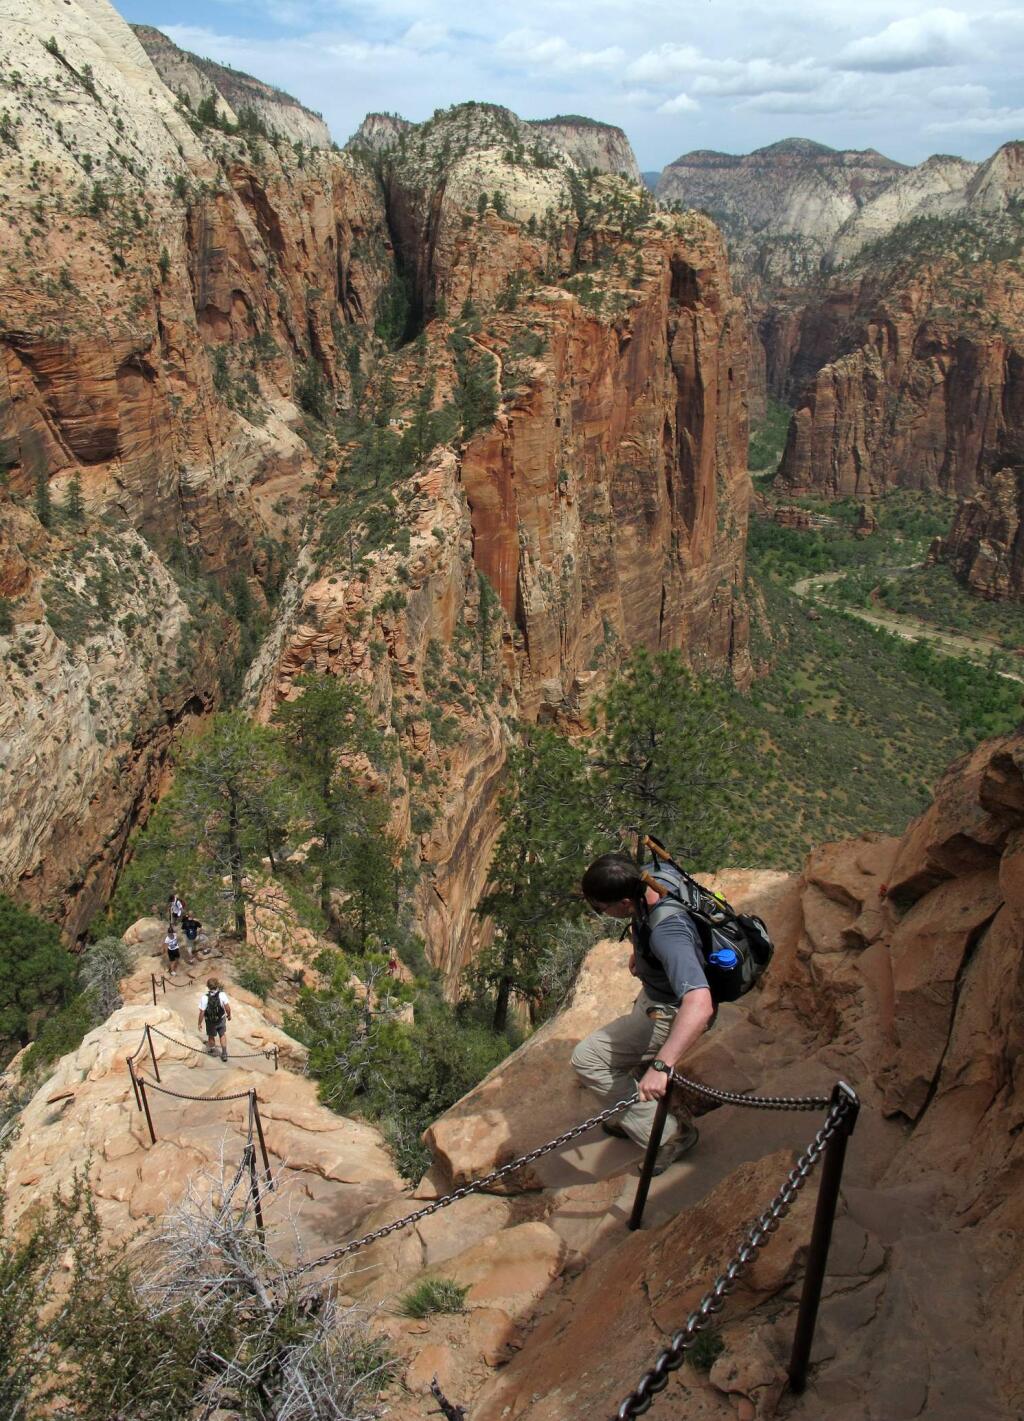 FILE - In this May 8, 2011, file photo, hikers climb down the Angels Landing trail in Zion National Park, in Utah. Zion National Park announced Monday, March 23, 2020, it is closing its campgrounds and part of a popular trail called Angel's Landing that is often crowded with people due to coronavirus. The top part of the hike that is being closed is bordered by steep drops and ascends some 1,500 feet (457 meters) above the southern Utah park's red-rock cliffs, offering sweeping views. (Jud Burkett/The Spectrum via AP, File)